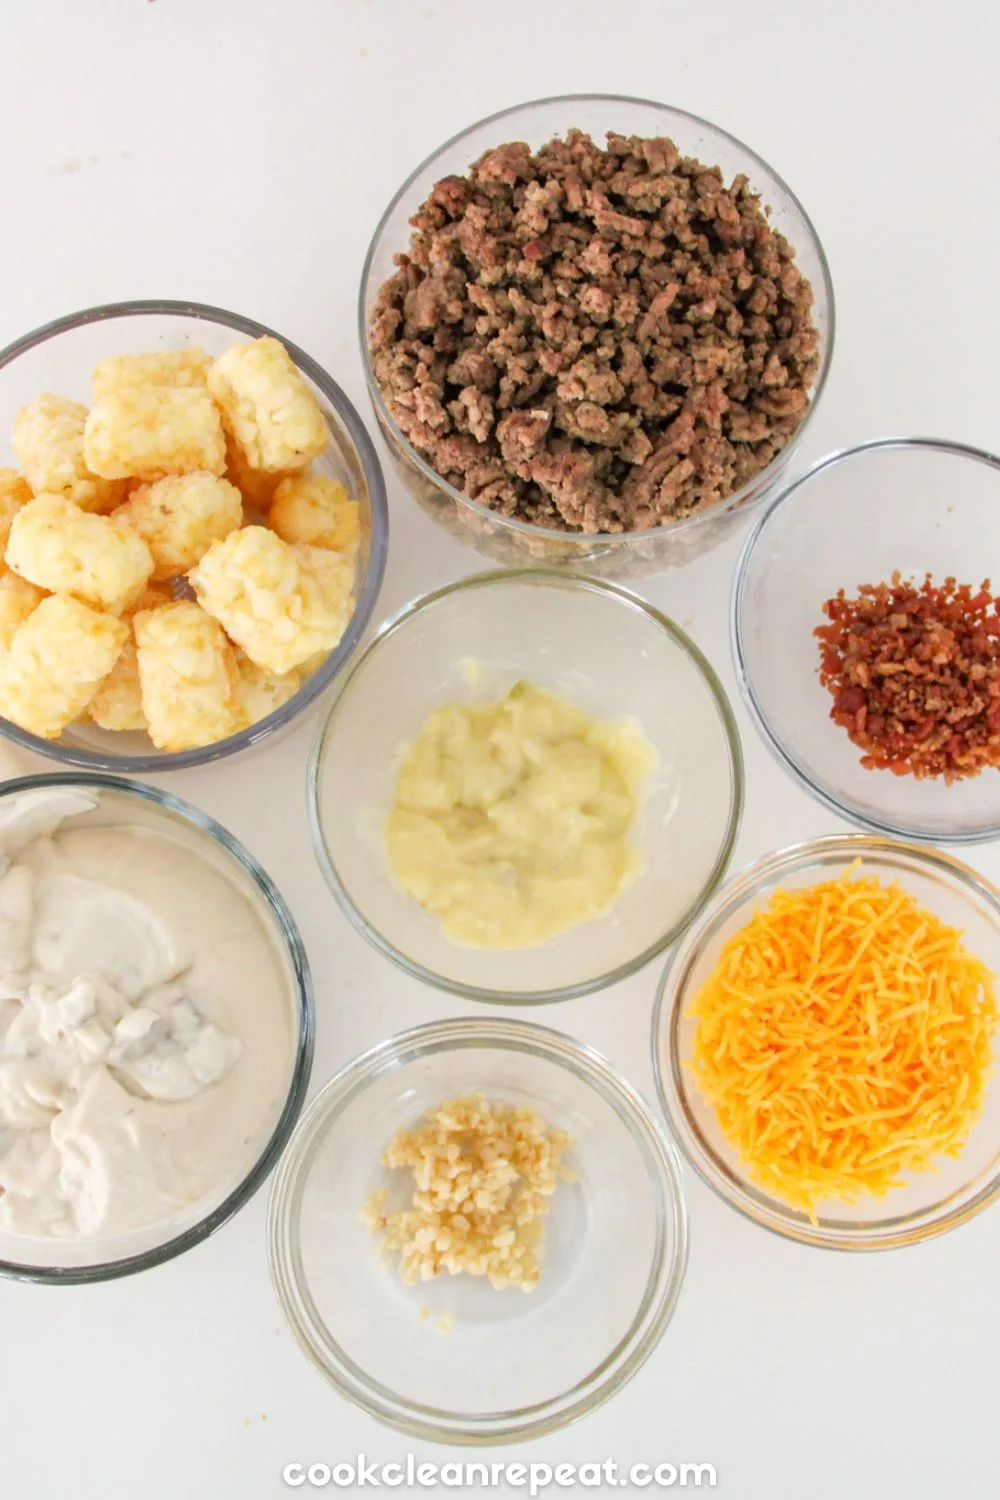 ingredients needed to make crockpot tater tot casserole